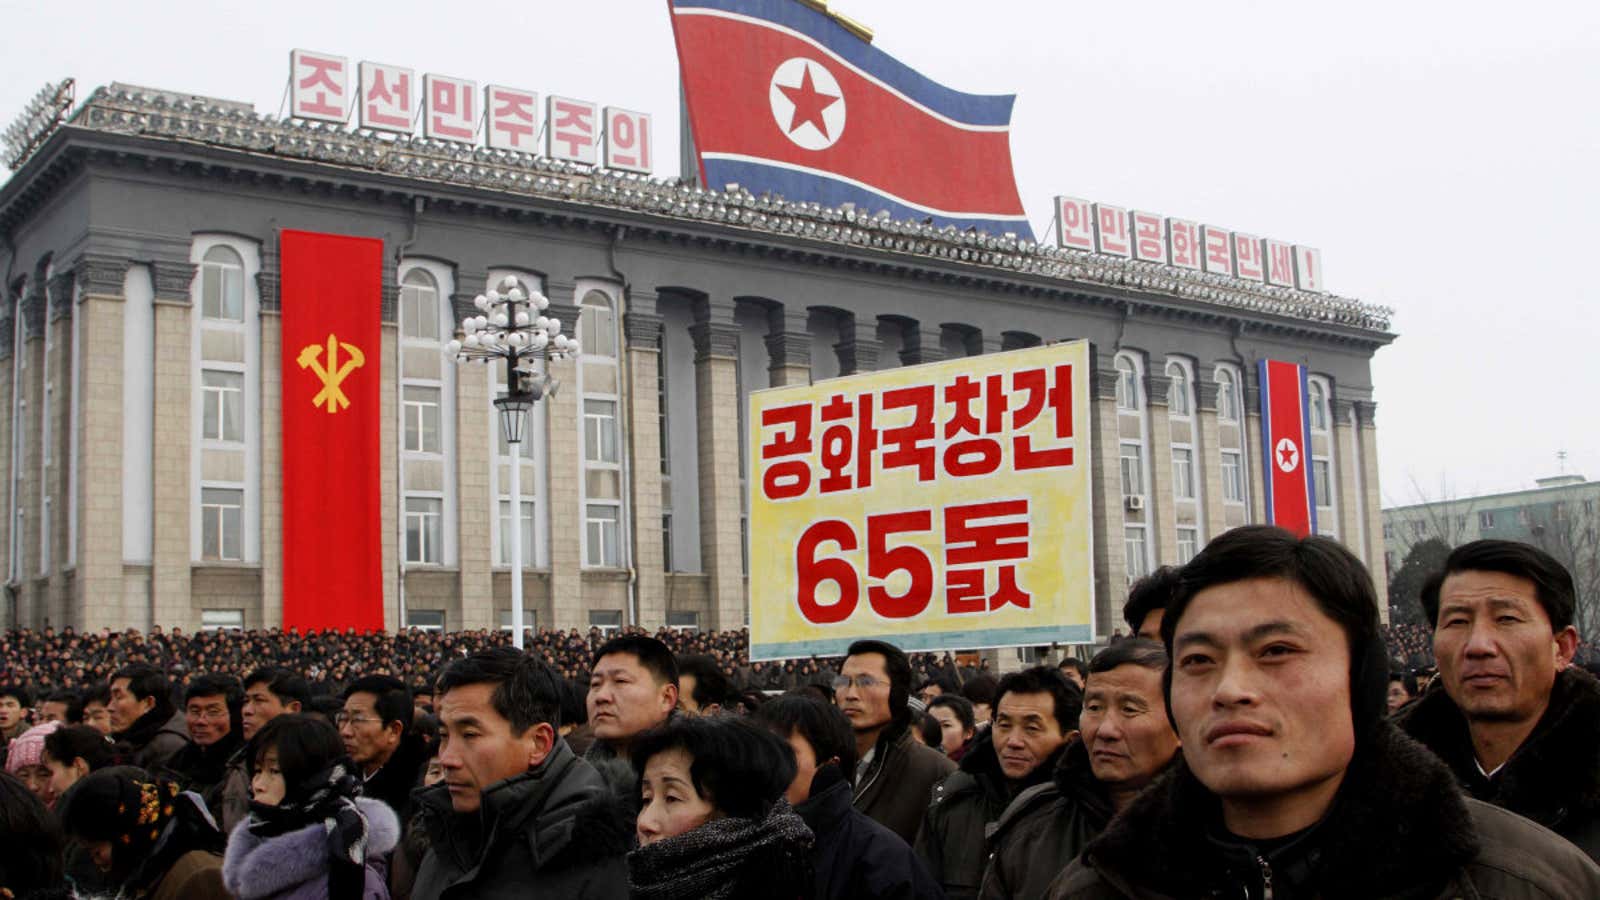 North Koreans are more aware of the outside world than the media portrays.